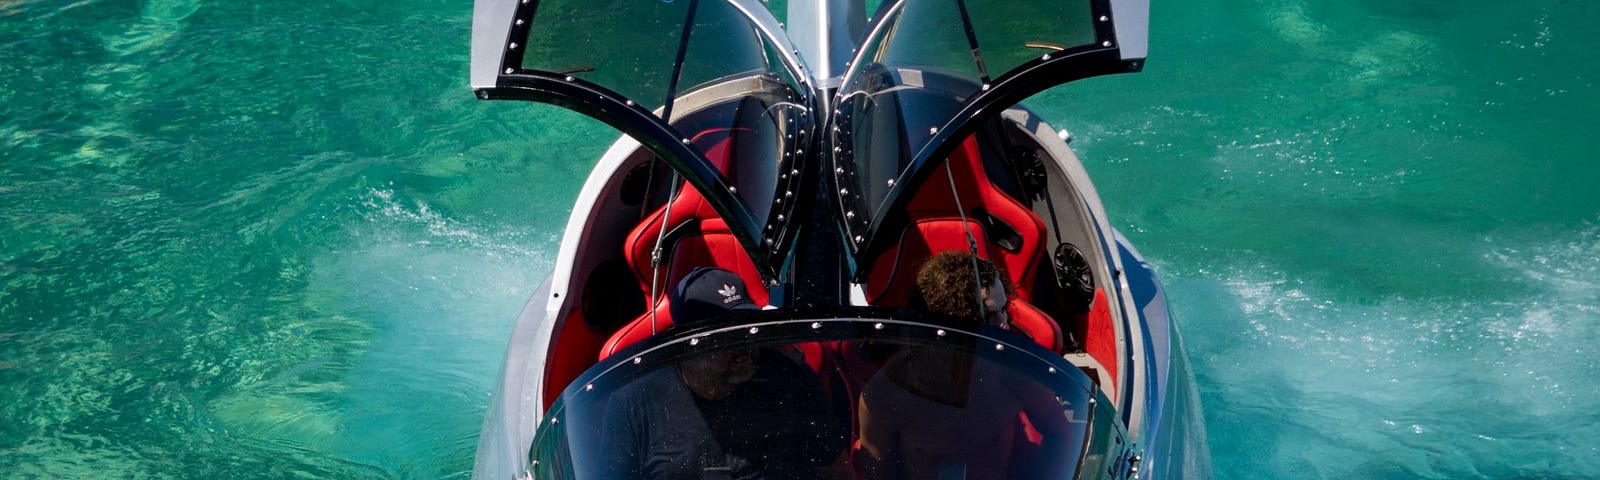 Looking down at the Jet Shark’s bow with gull wing doors open and floating on water.